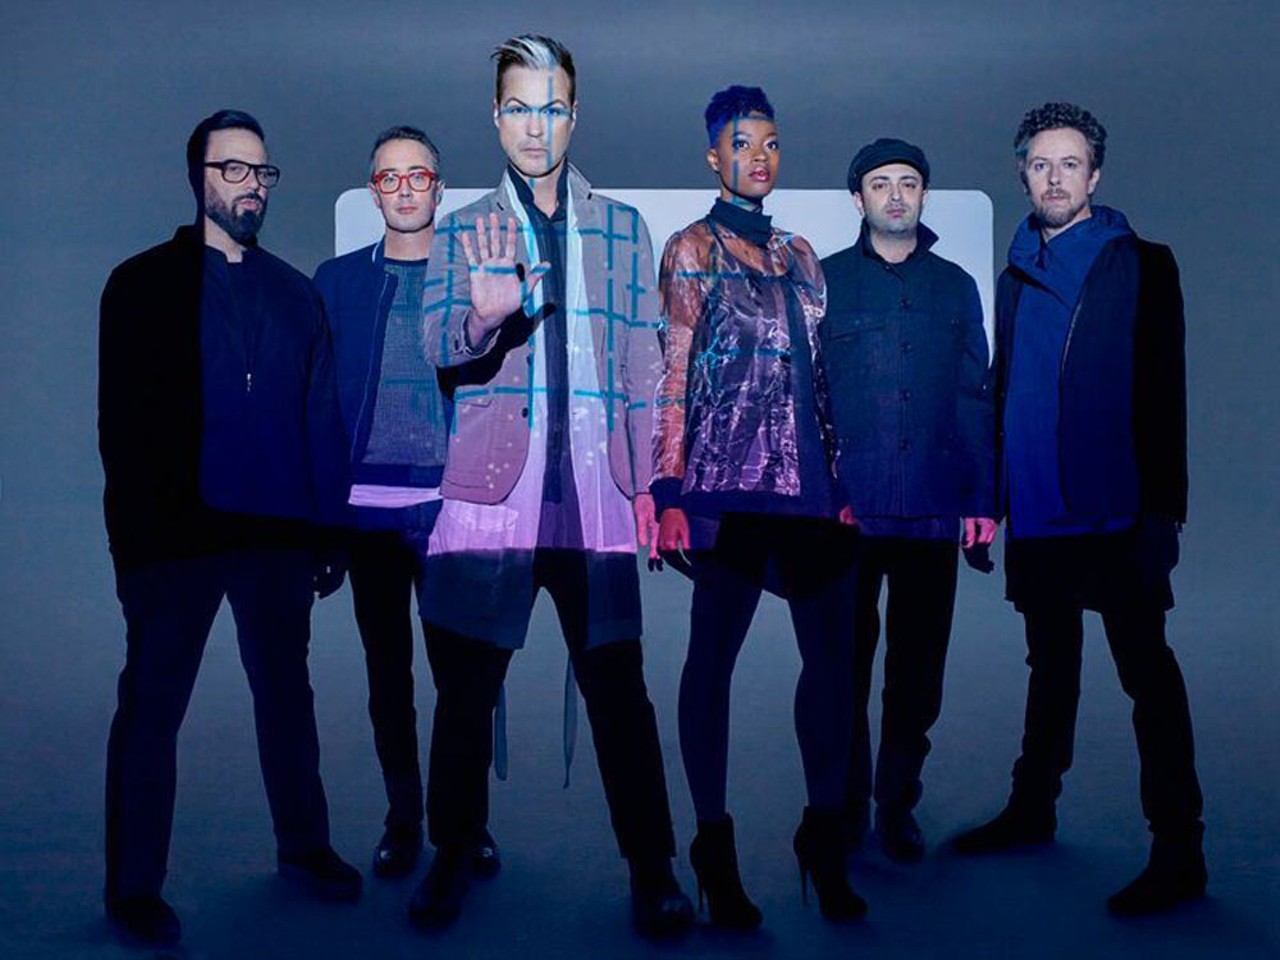 Fitz & the Tantrums
This LA-band borders the line of indie pop and neo soul and just released their third and self-titled album. If you haven&#146;t heard of Fitz & the Tantrums, you may recognize them from their radio hits &#147;HandClap&#148;, &#147;The Walker&#148;, and &#147;More Than Just a Dream.&#148; Saturday @ 5:15 p.m., Roots Stage.